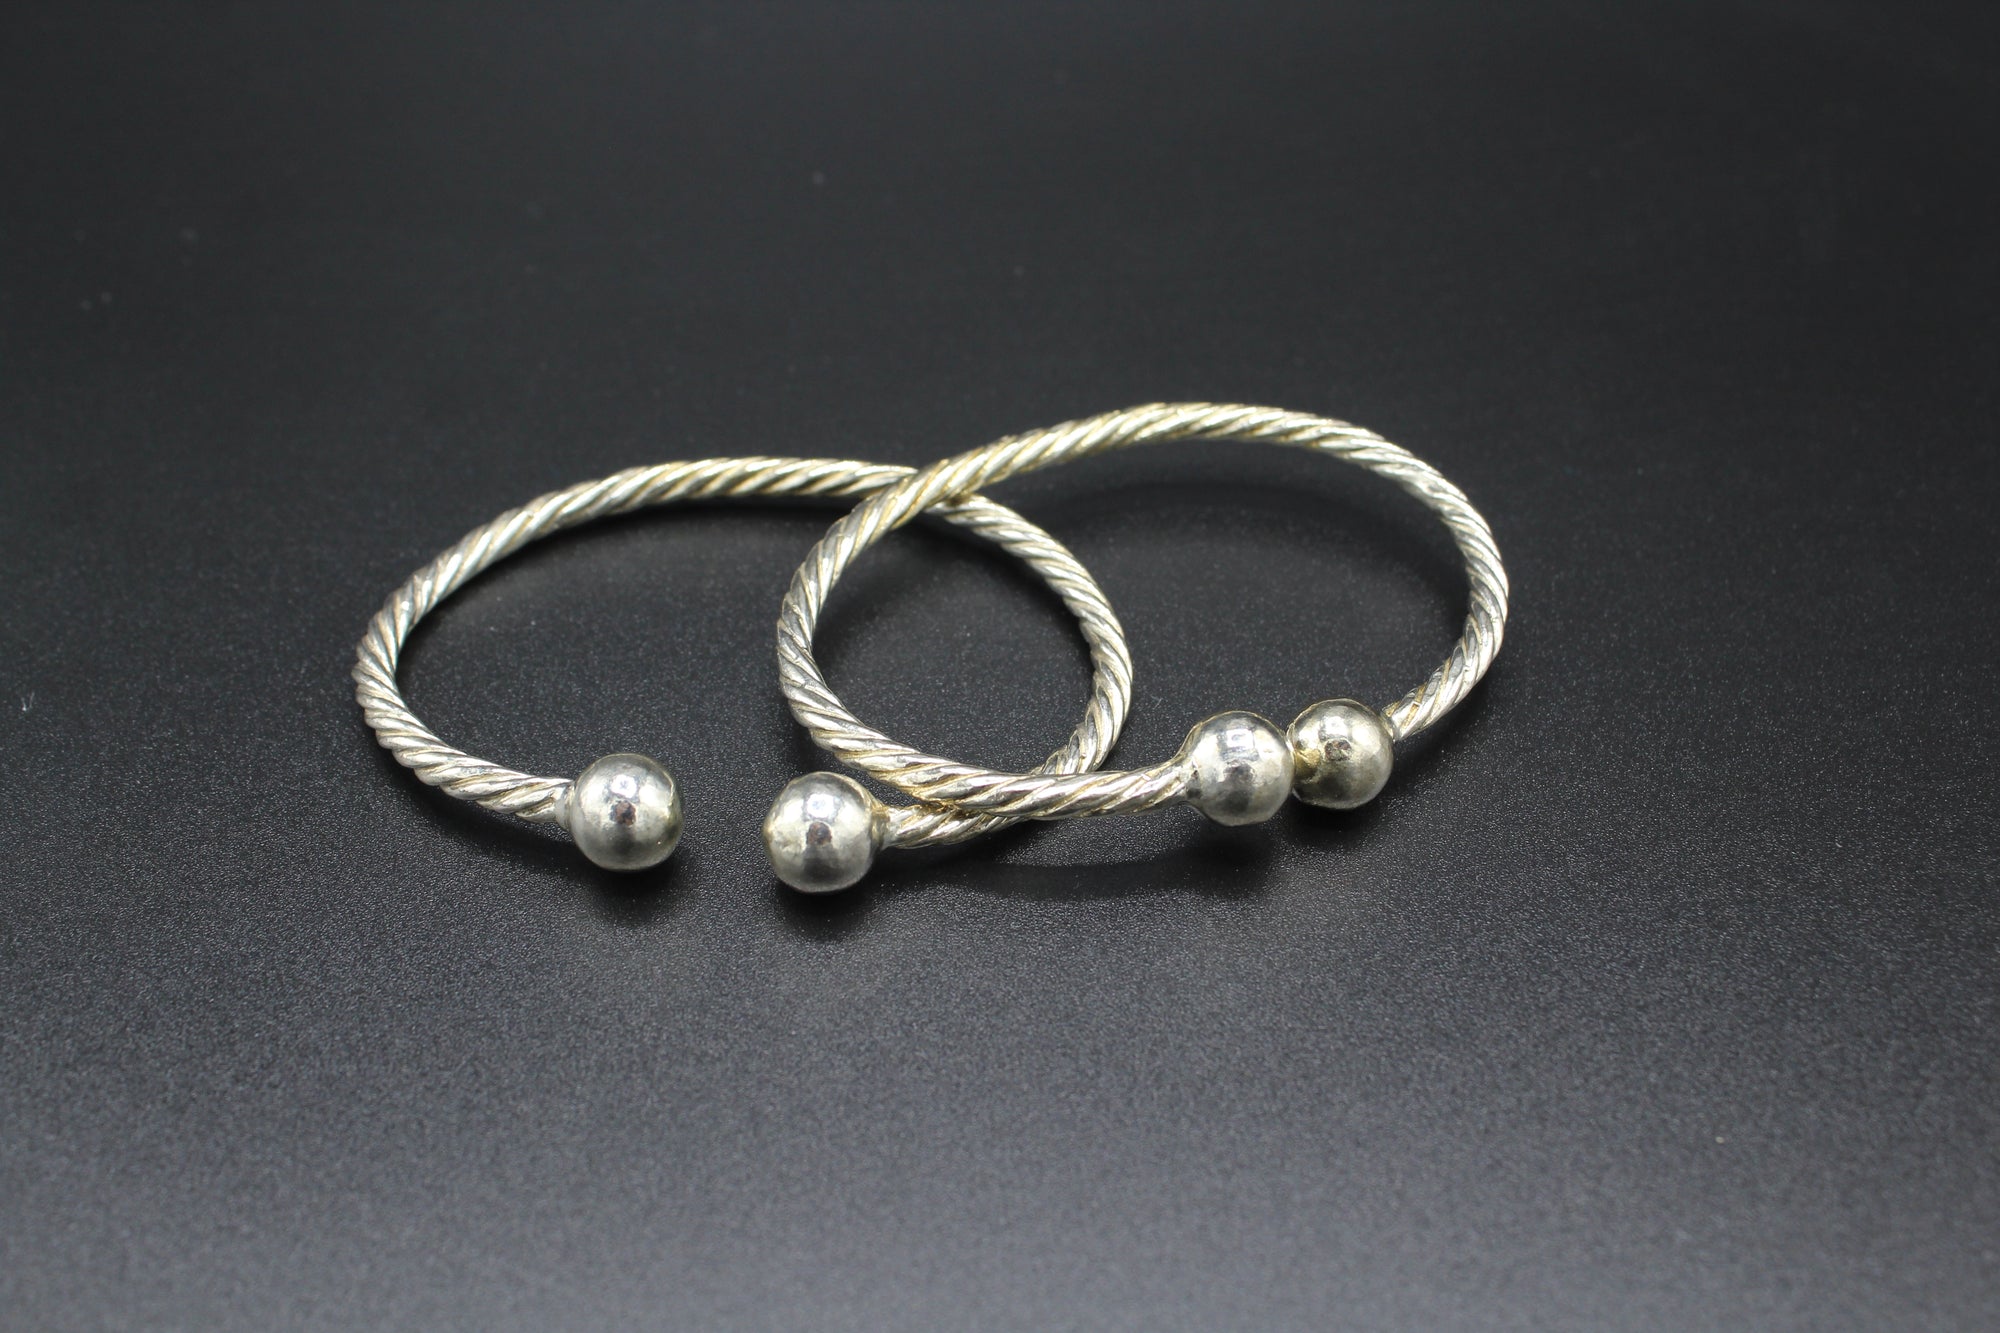 "BALL ENDS" 925 sterling silver bangles